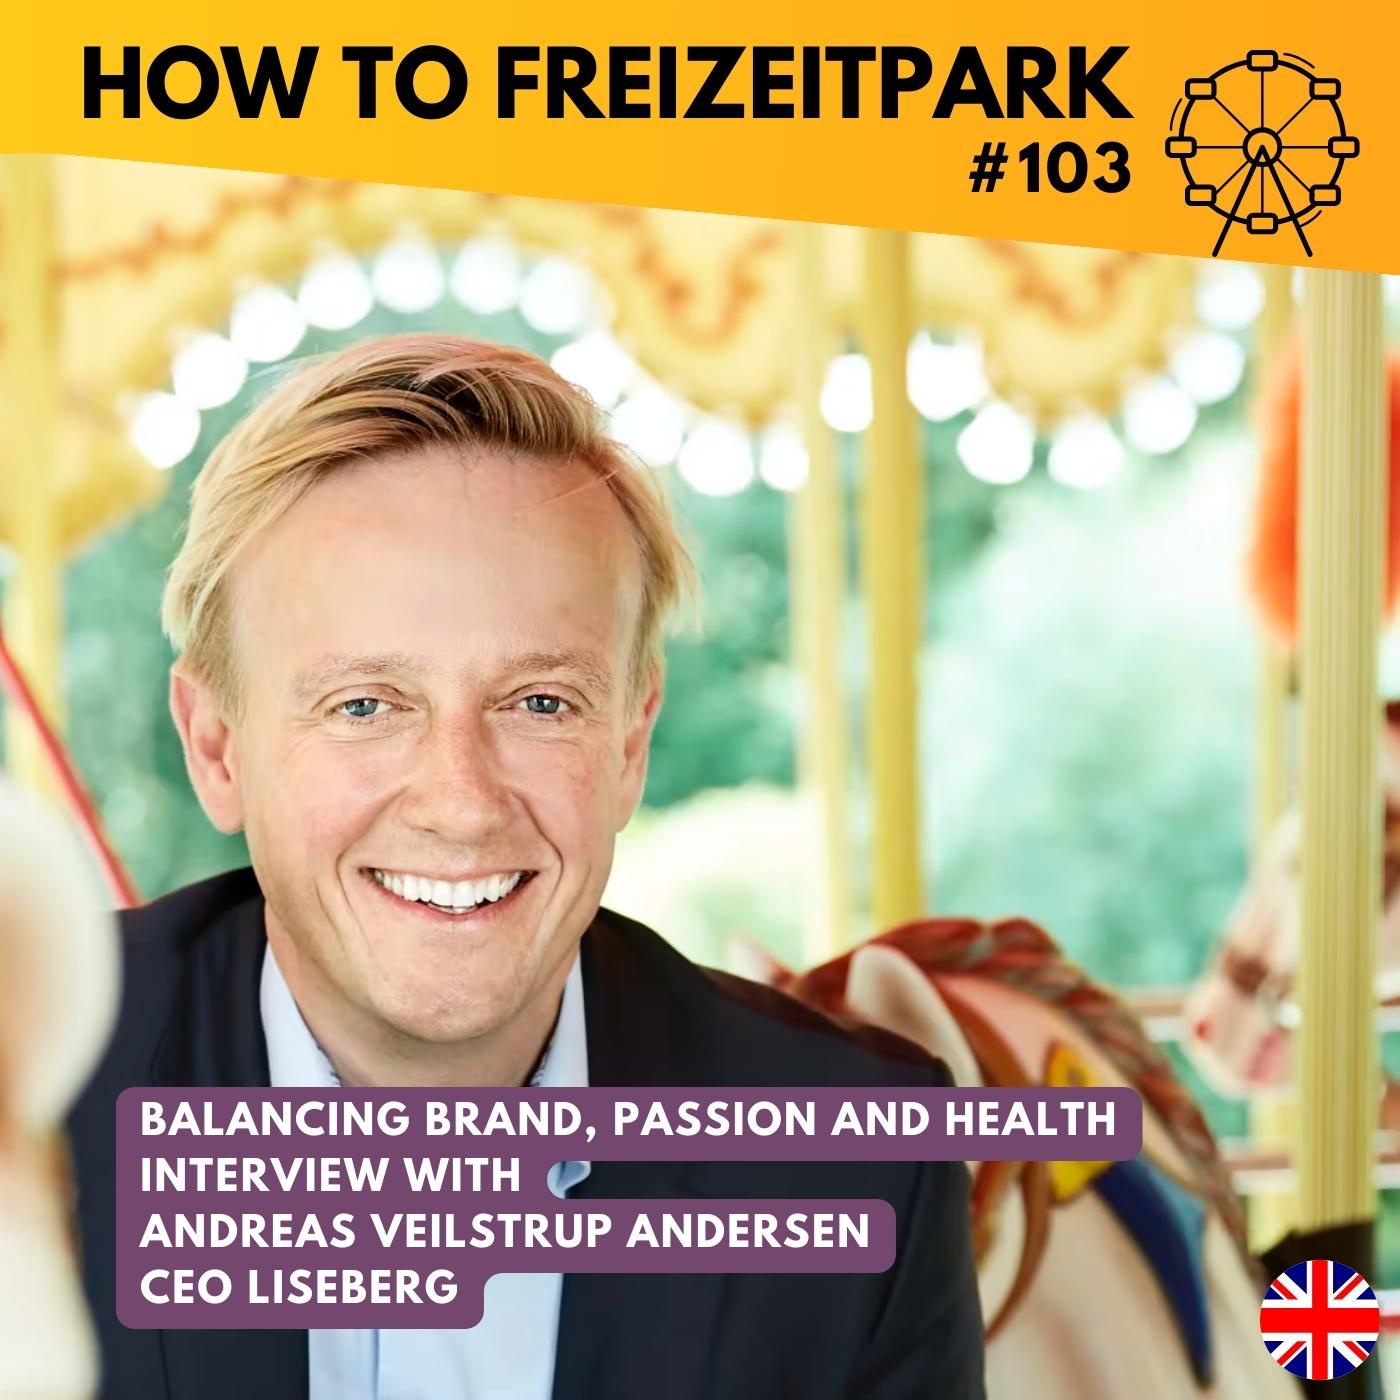 #103 - Balancing passion, brand and health - Interview with Andreas Veilstrup Andersen - CEO Liseberg (engl.)